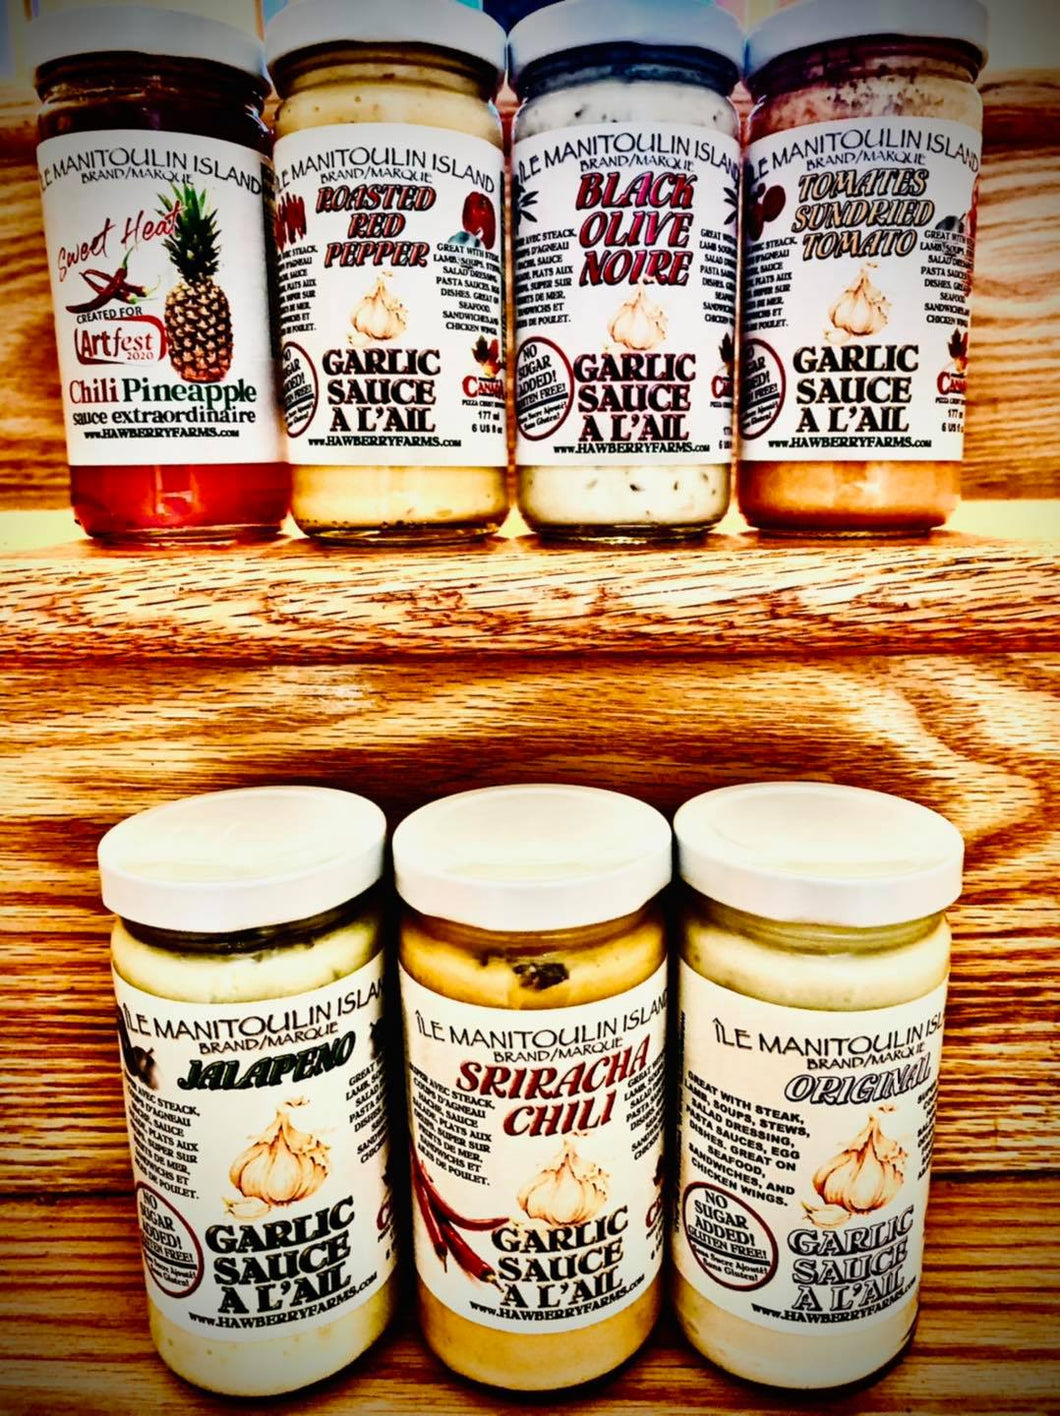 Garlic sauces (two for $14)